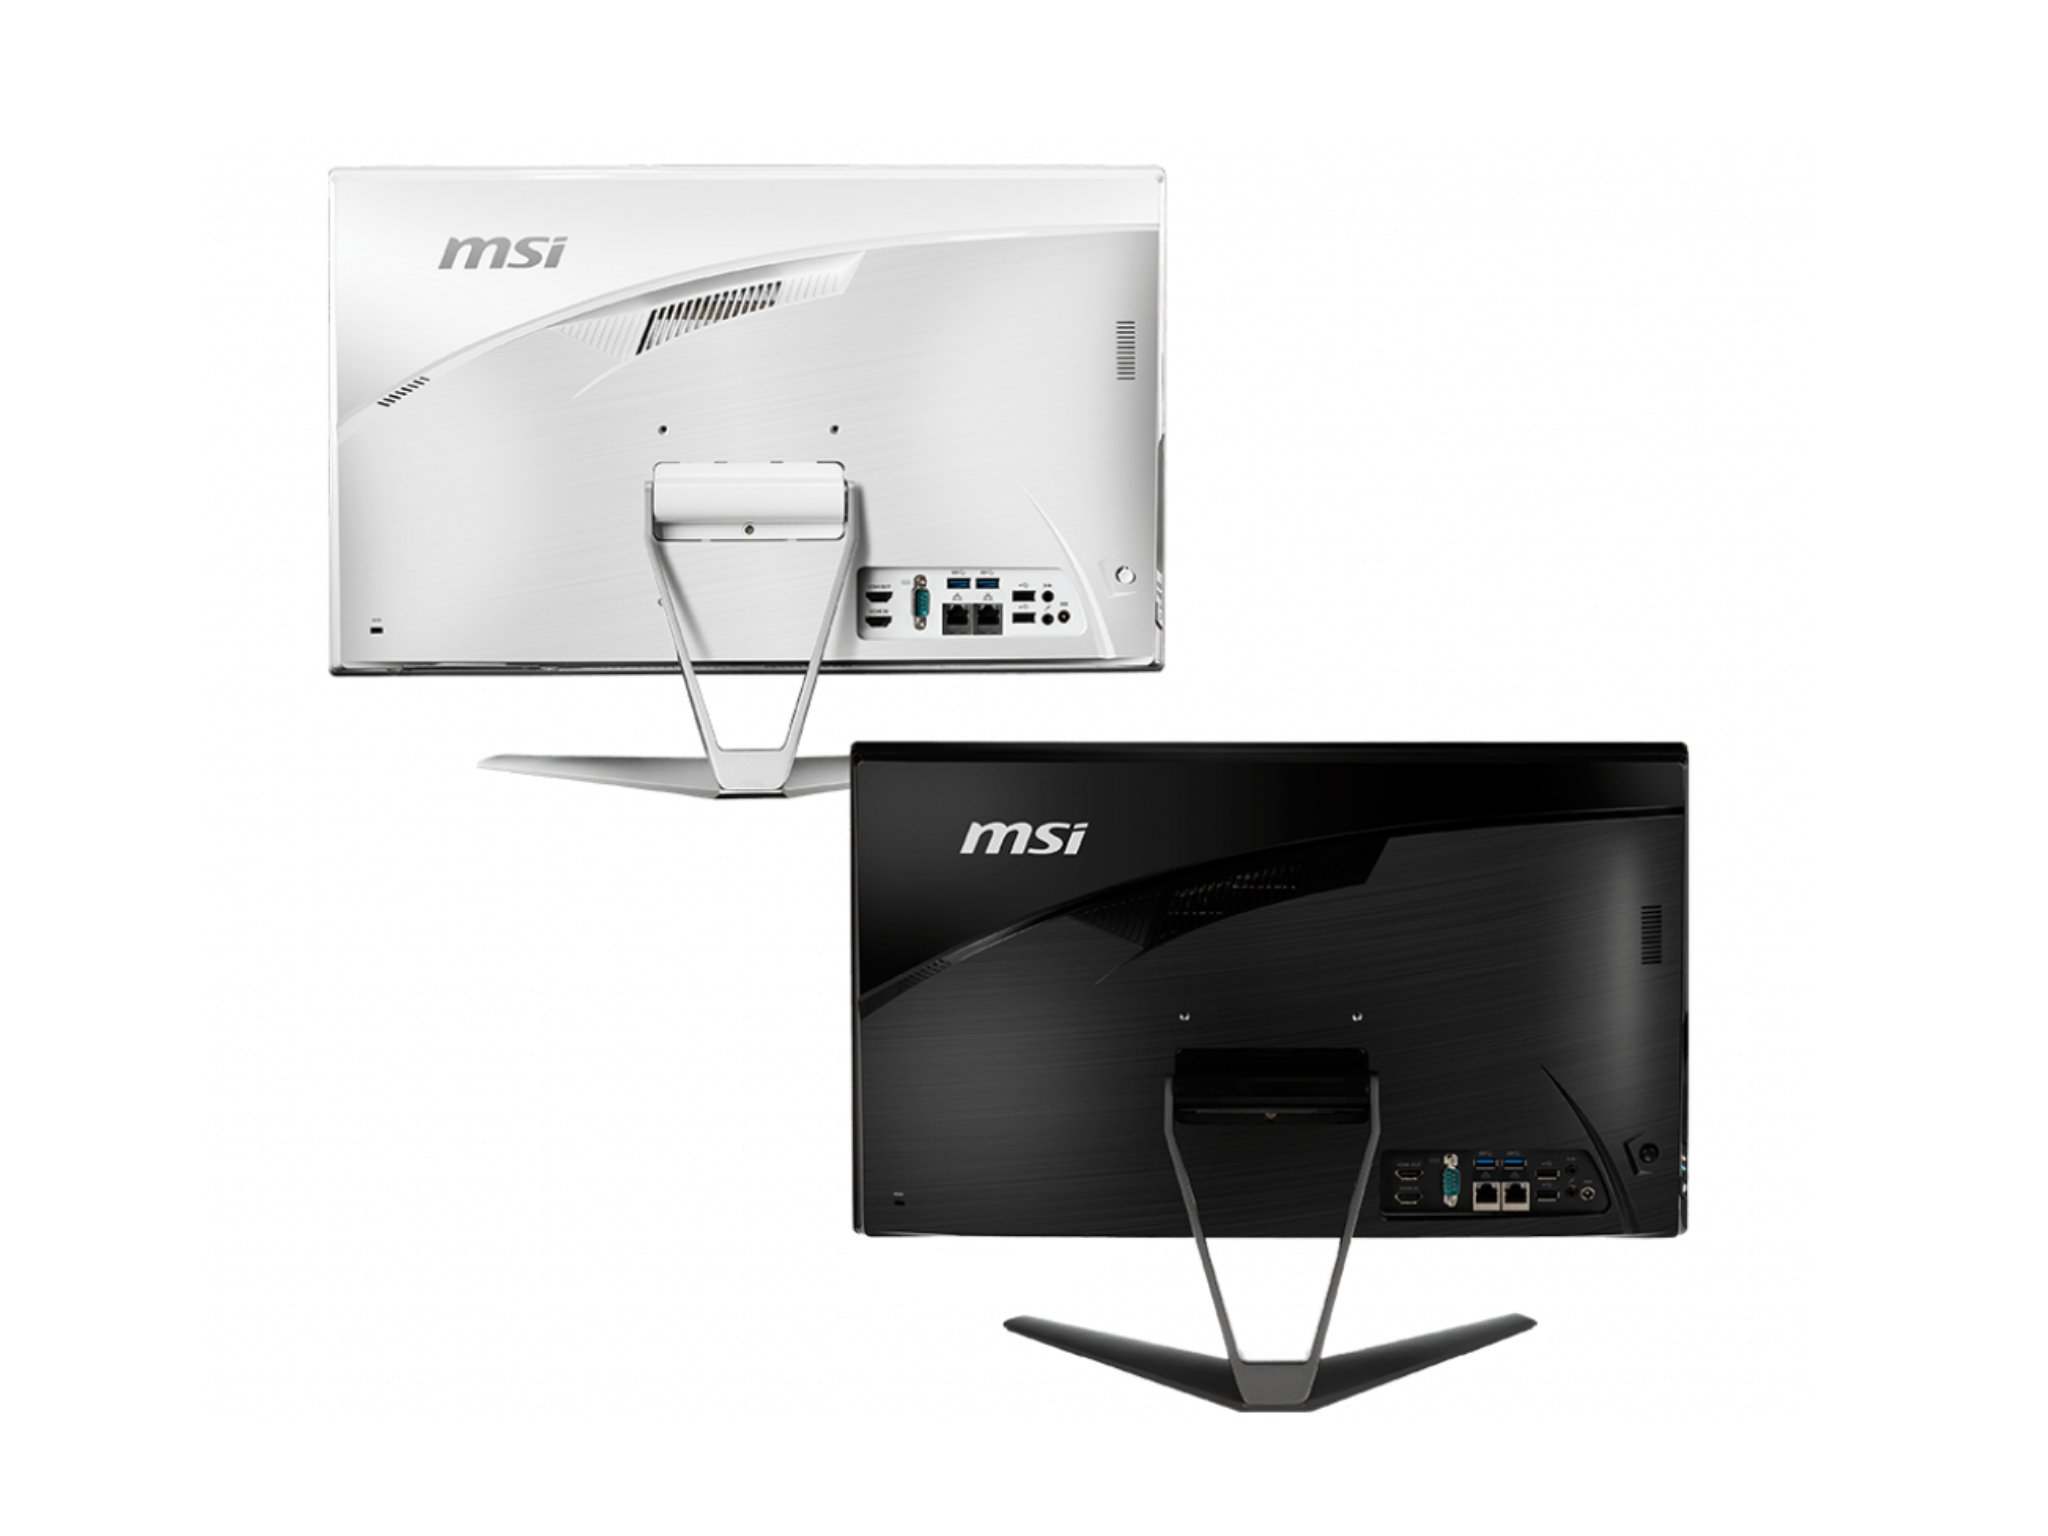 Reach out and touch the new MSI PRO 22XT 10M all-in-one for 